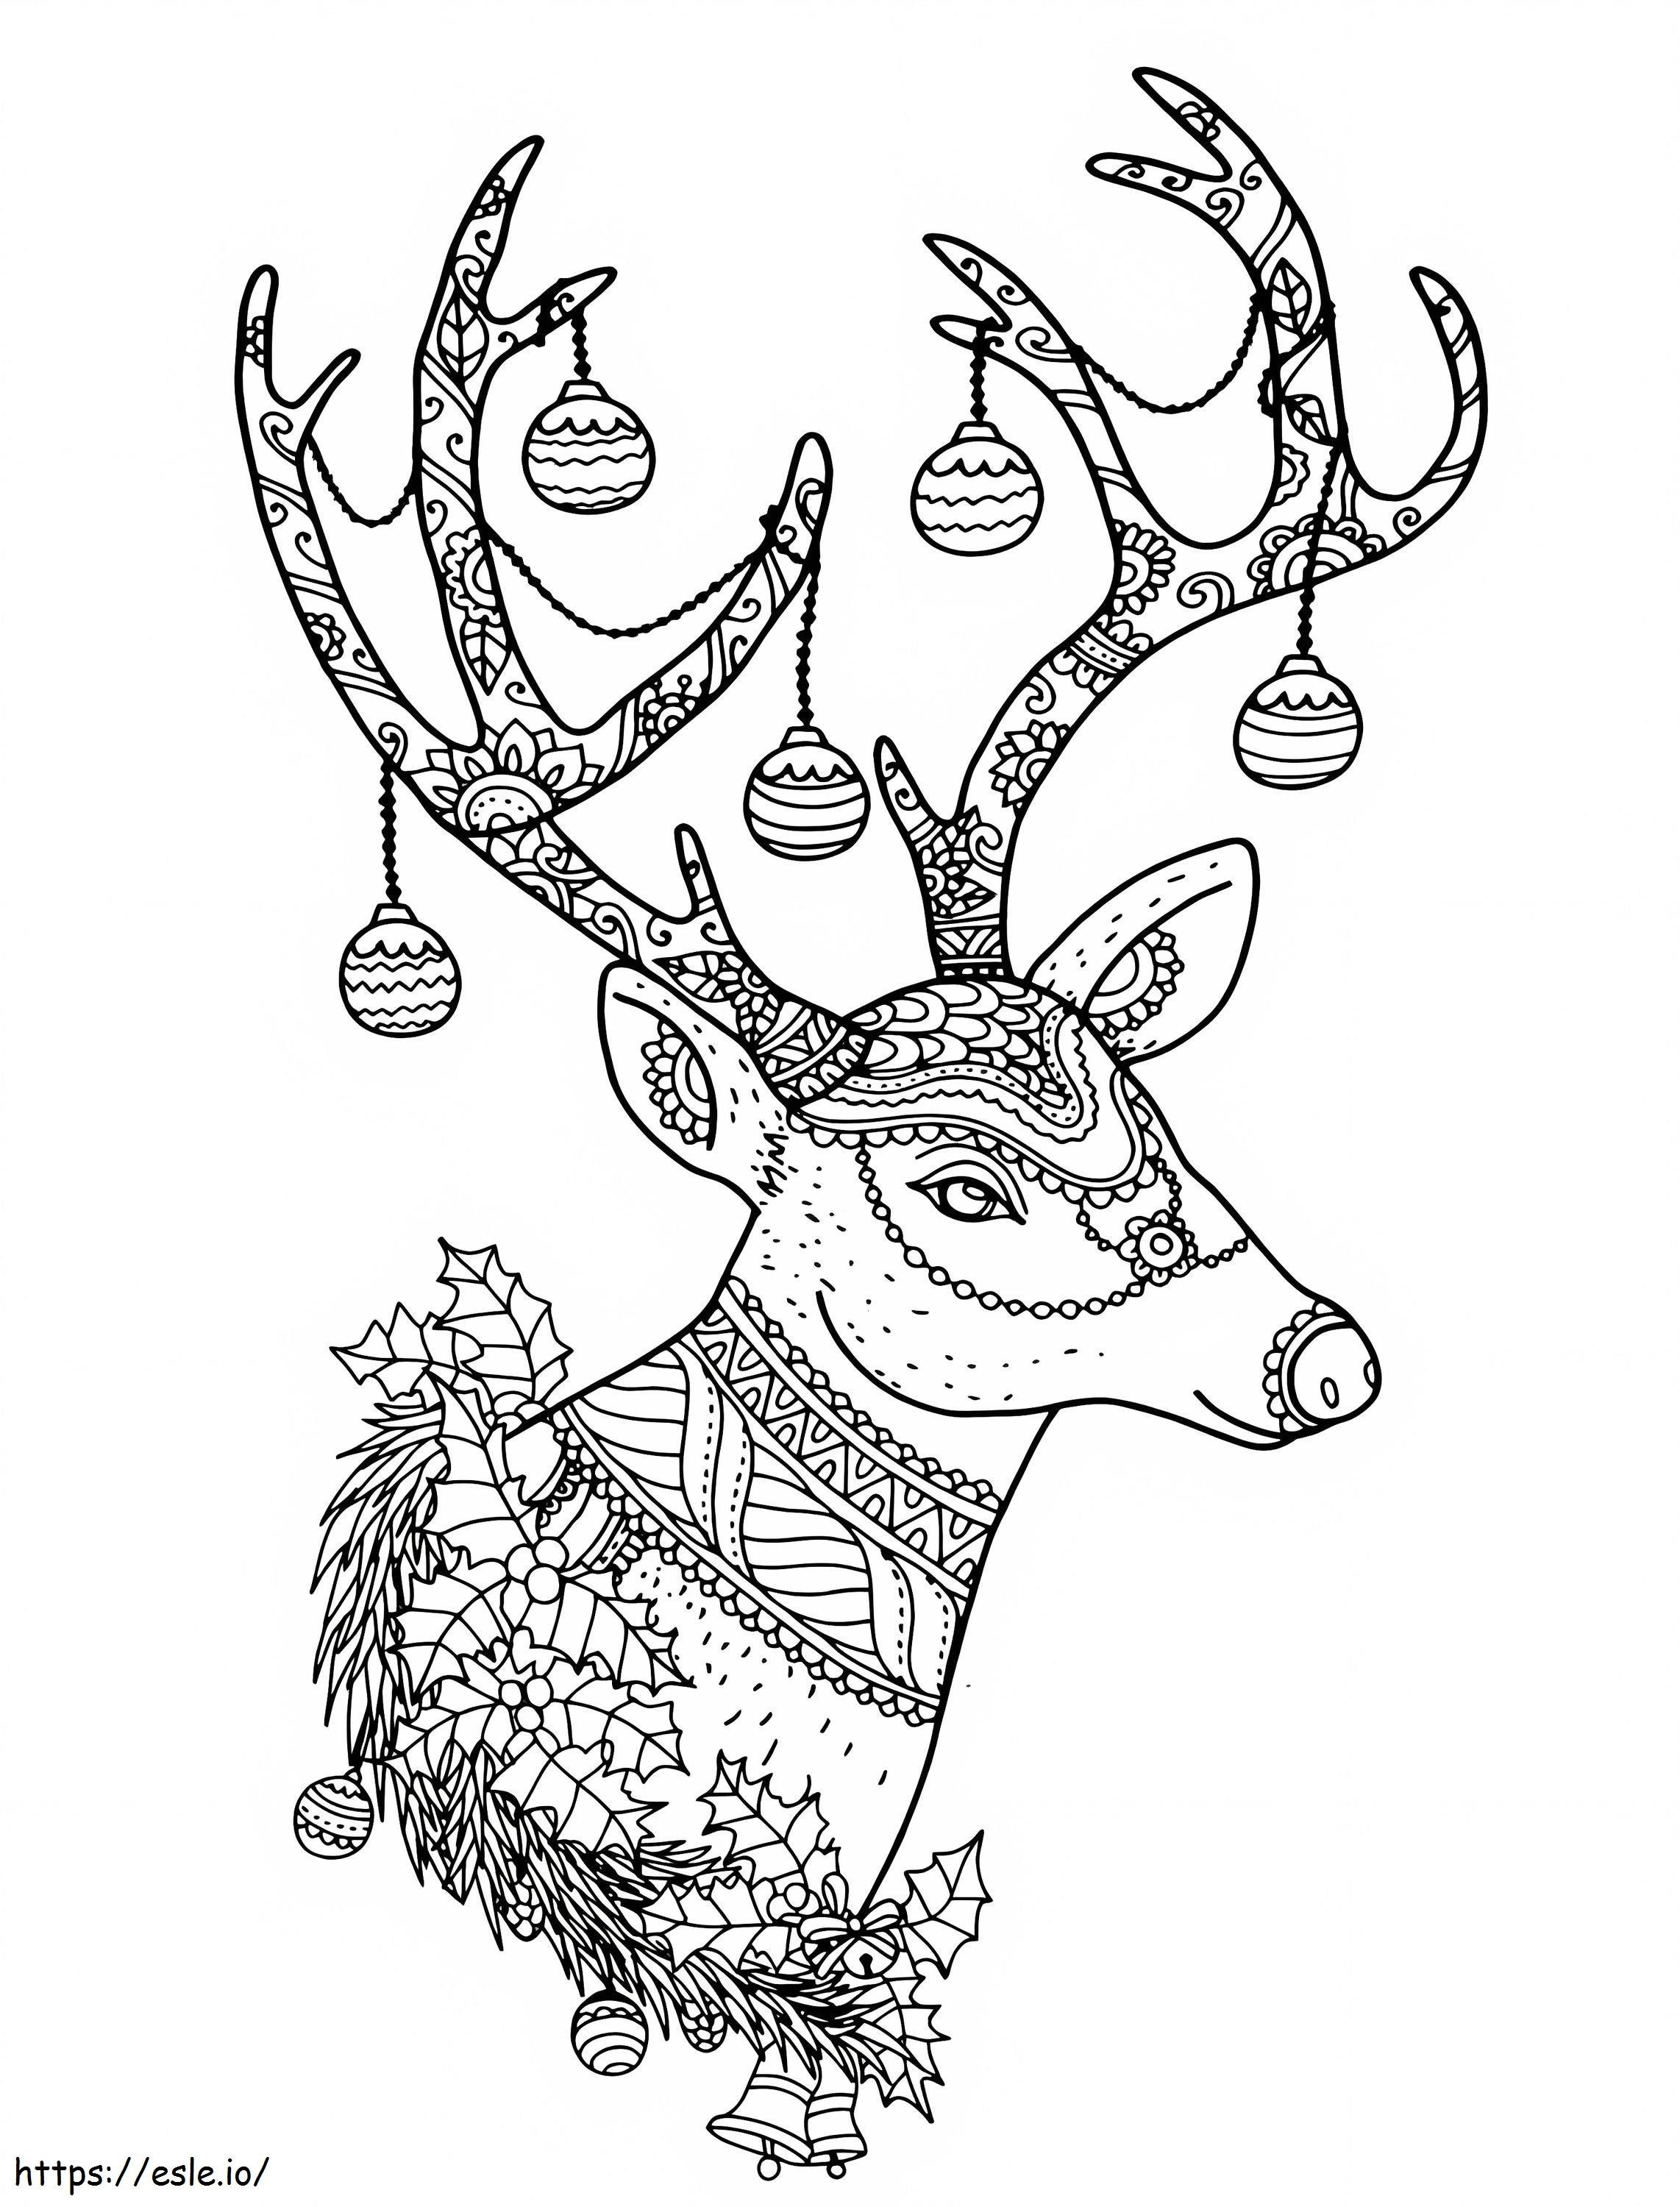 Christmas Reindeer For Adults coloring page